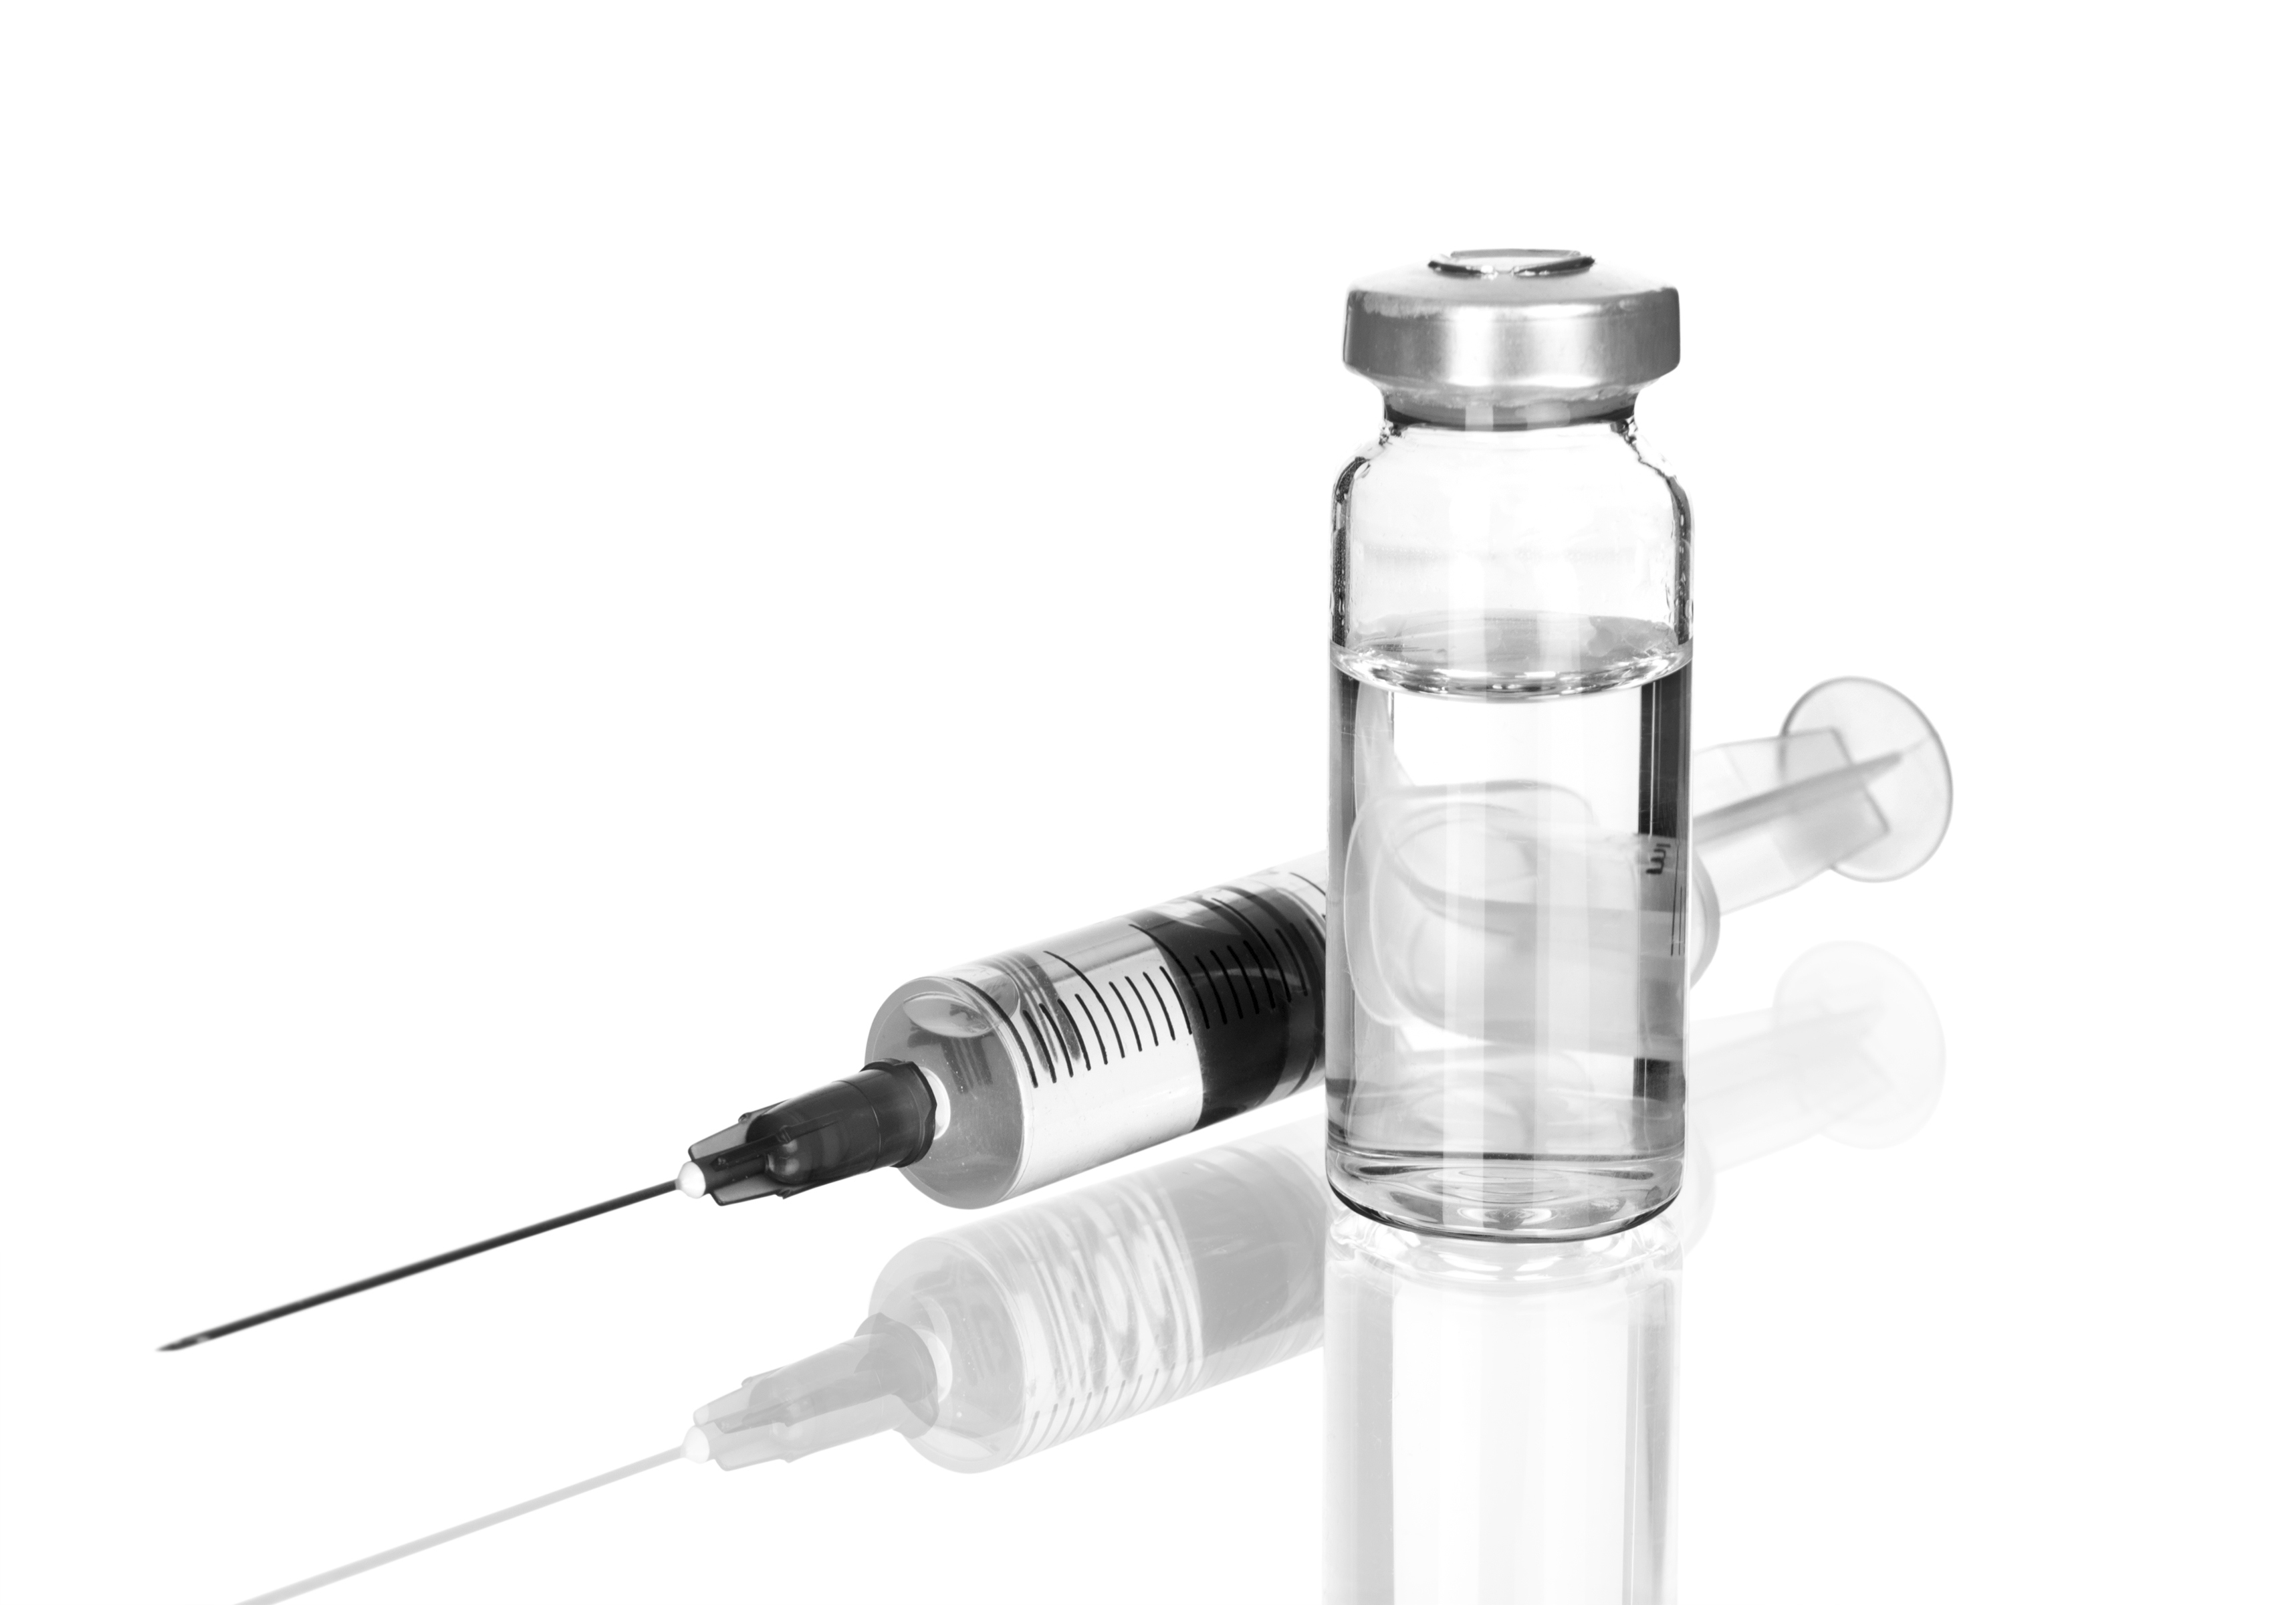 The Technique For Injecting Steroids